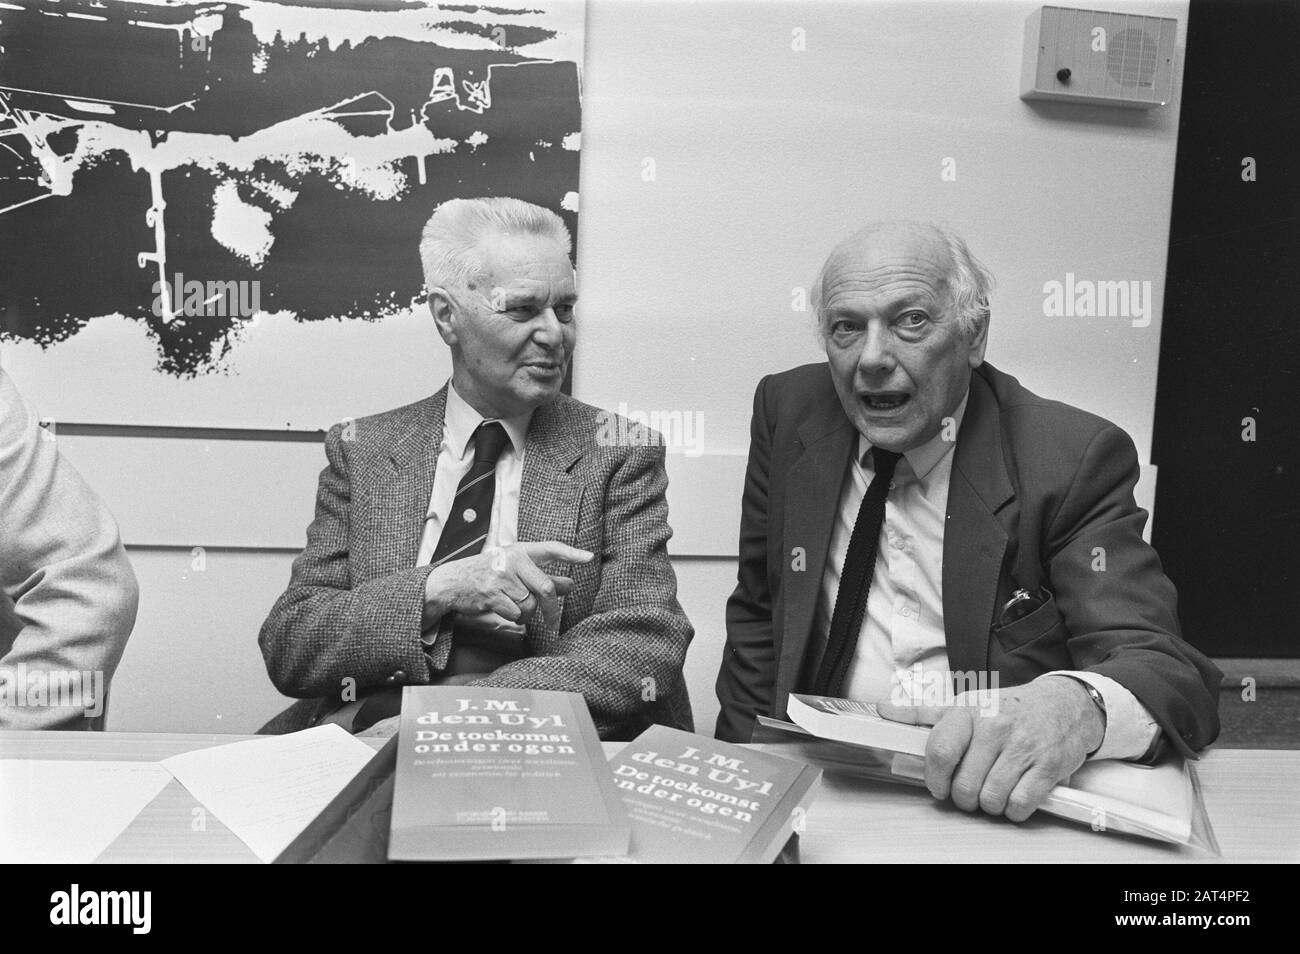 Joop den Uyl (r.) offered in The Hague 1st copy of his collection de Future  to Professor Jan Tinbergen Joop den Uyl (r.) and Jan Tinbergen Date: 25  March 1986 Location: The